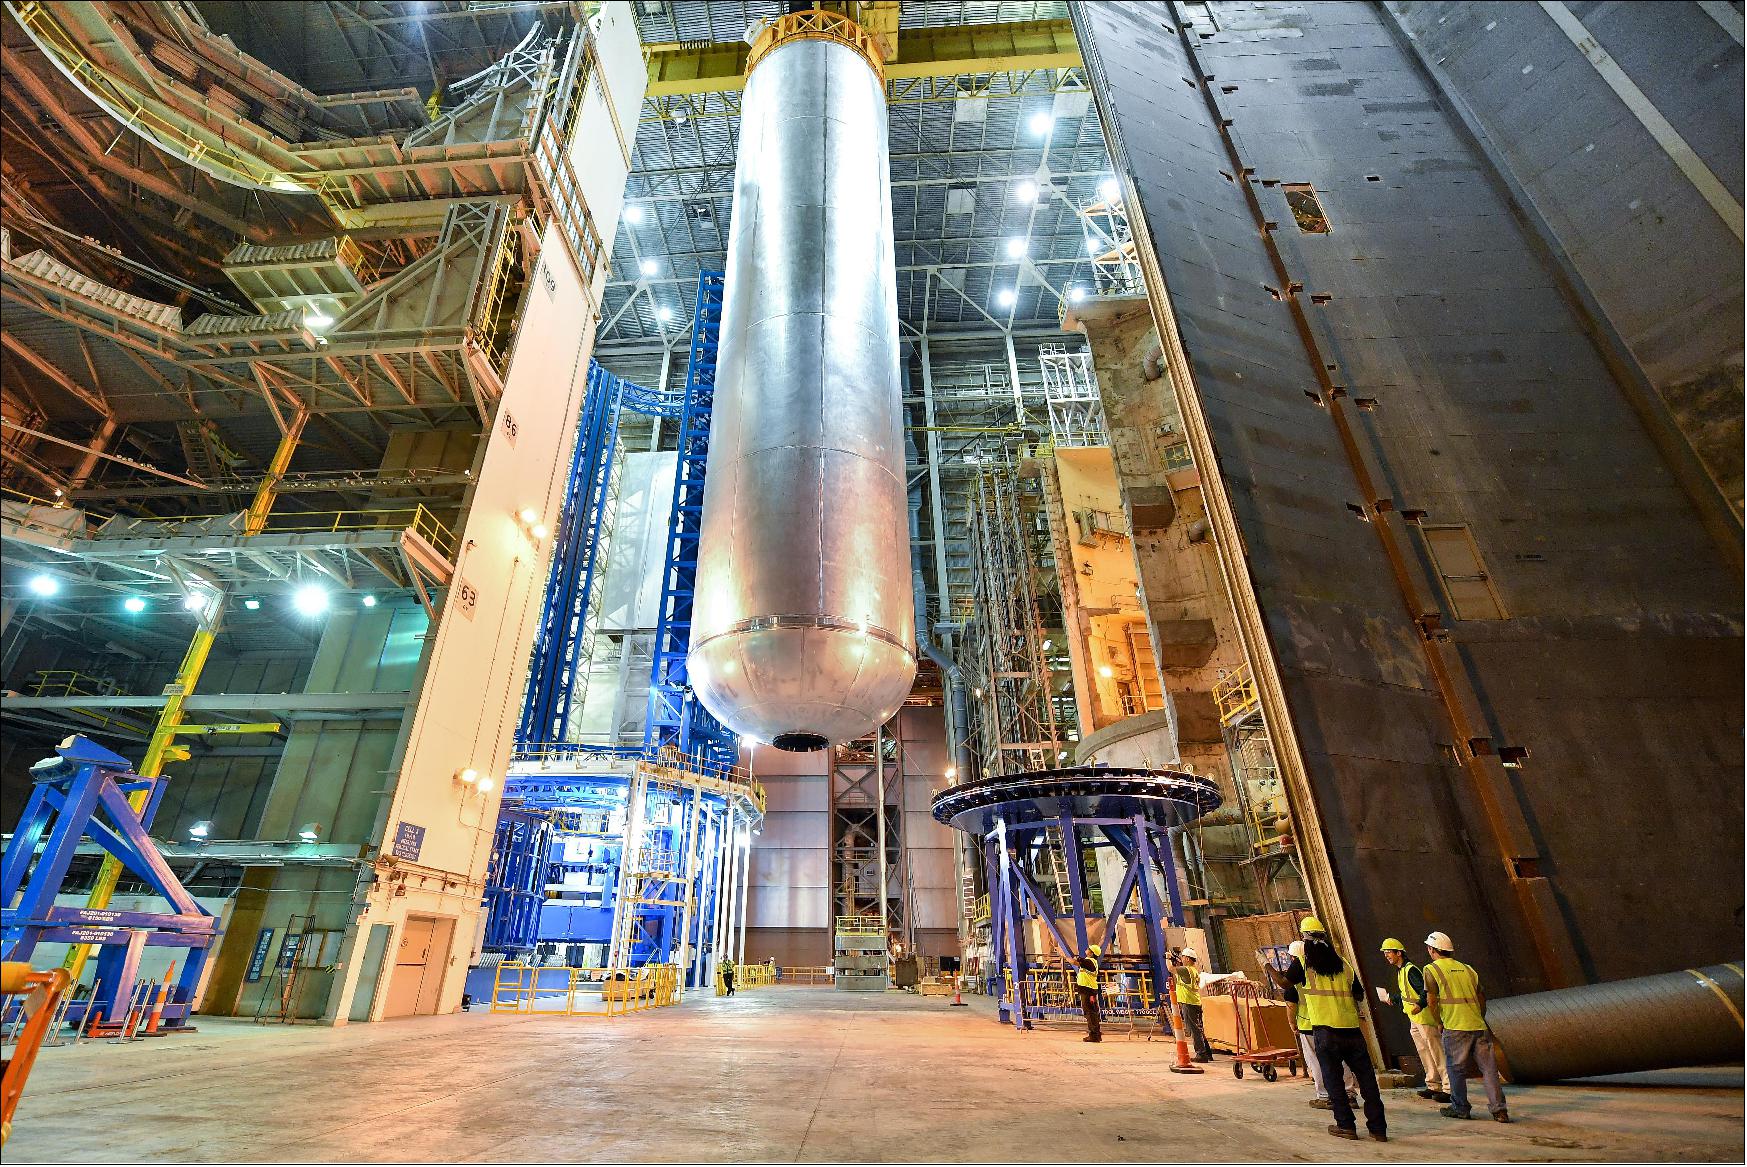 Figure 3: Welding is complete on the largest piece of the core stage that will provide the fuel for the first flight of NASA's new rocket, the Space Launch System, with the Orion spacecraft in 2018. The core stage liquid hydrogen tank has completed welding on the Vertical Assembly Center at NASA's Michoud Assembly Facility in New Orleans. Standing more than 40 m tall and 8.4 m in diameter, the liquid hydrogen tank is the largest cryogenic fuel tank for a rocket in the world. The liquid hydrogen tank and liquid oxygen tank are part of the core stage — the "backbone" of the SLS rocket that will stand at more than 61 m tall. Together, the tanks will hold 733,000 gallons (2775 m3) of propellant and feed the vehicle's four RS-25 engines to produce a total of 2 million pounds of thrust (8896 kN) This is the second major piece of core stage flight hardware to finish full welding on the Vertical Assembly Center. The core stage flight engine section completed welding in April 2016. More than 1.7 miles of welds have been completed for core stage hardware at Michoud. Traveling to deep space requires a large rocket that can carry huge payloads, and SLS will have the payload capacity needed to carry crew and cargo for future exploration missions, including NASA's Journey to Mars. 5)